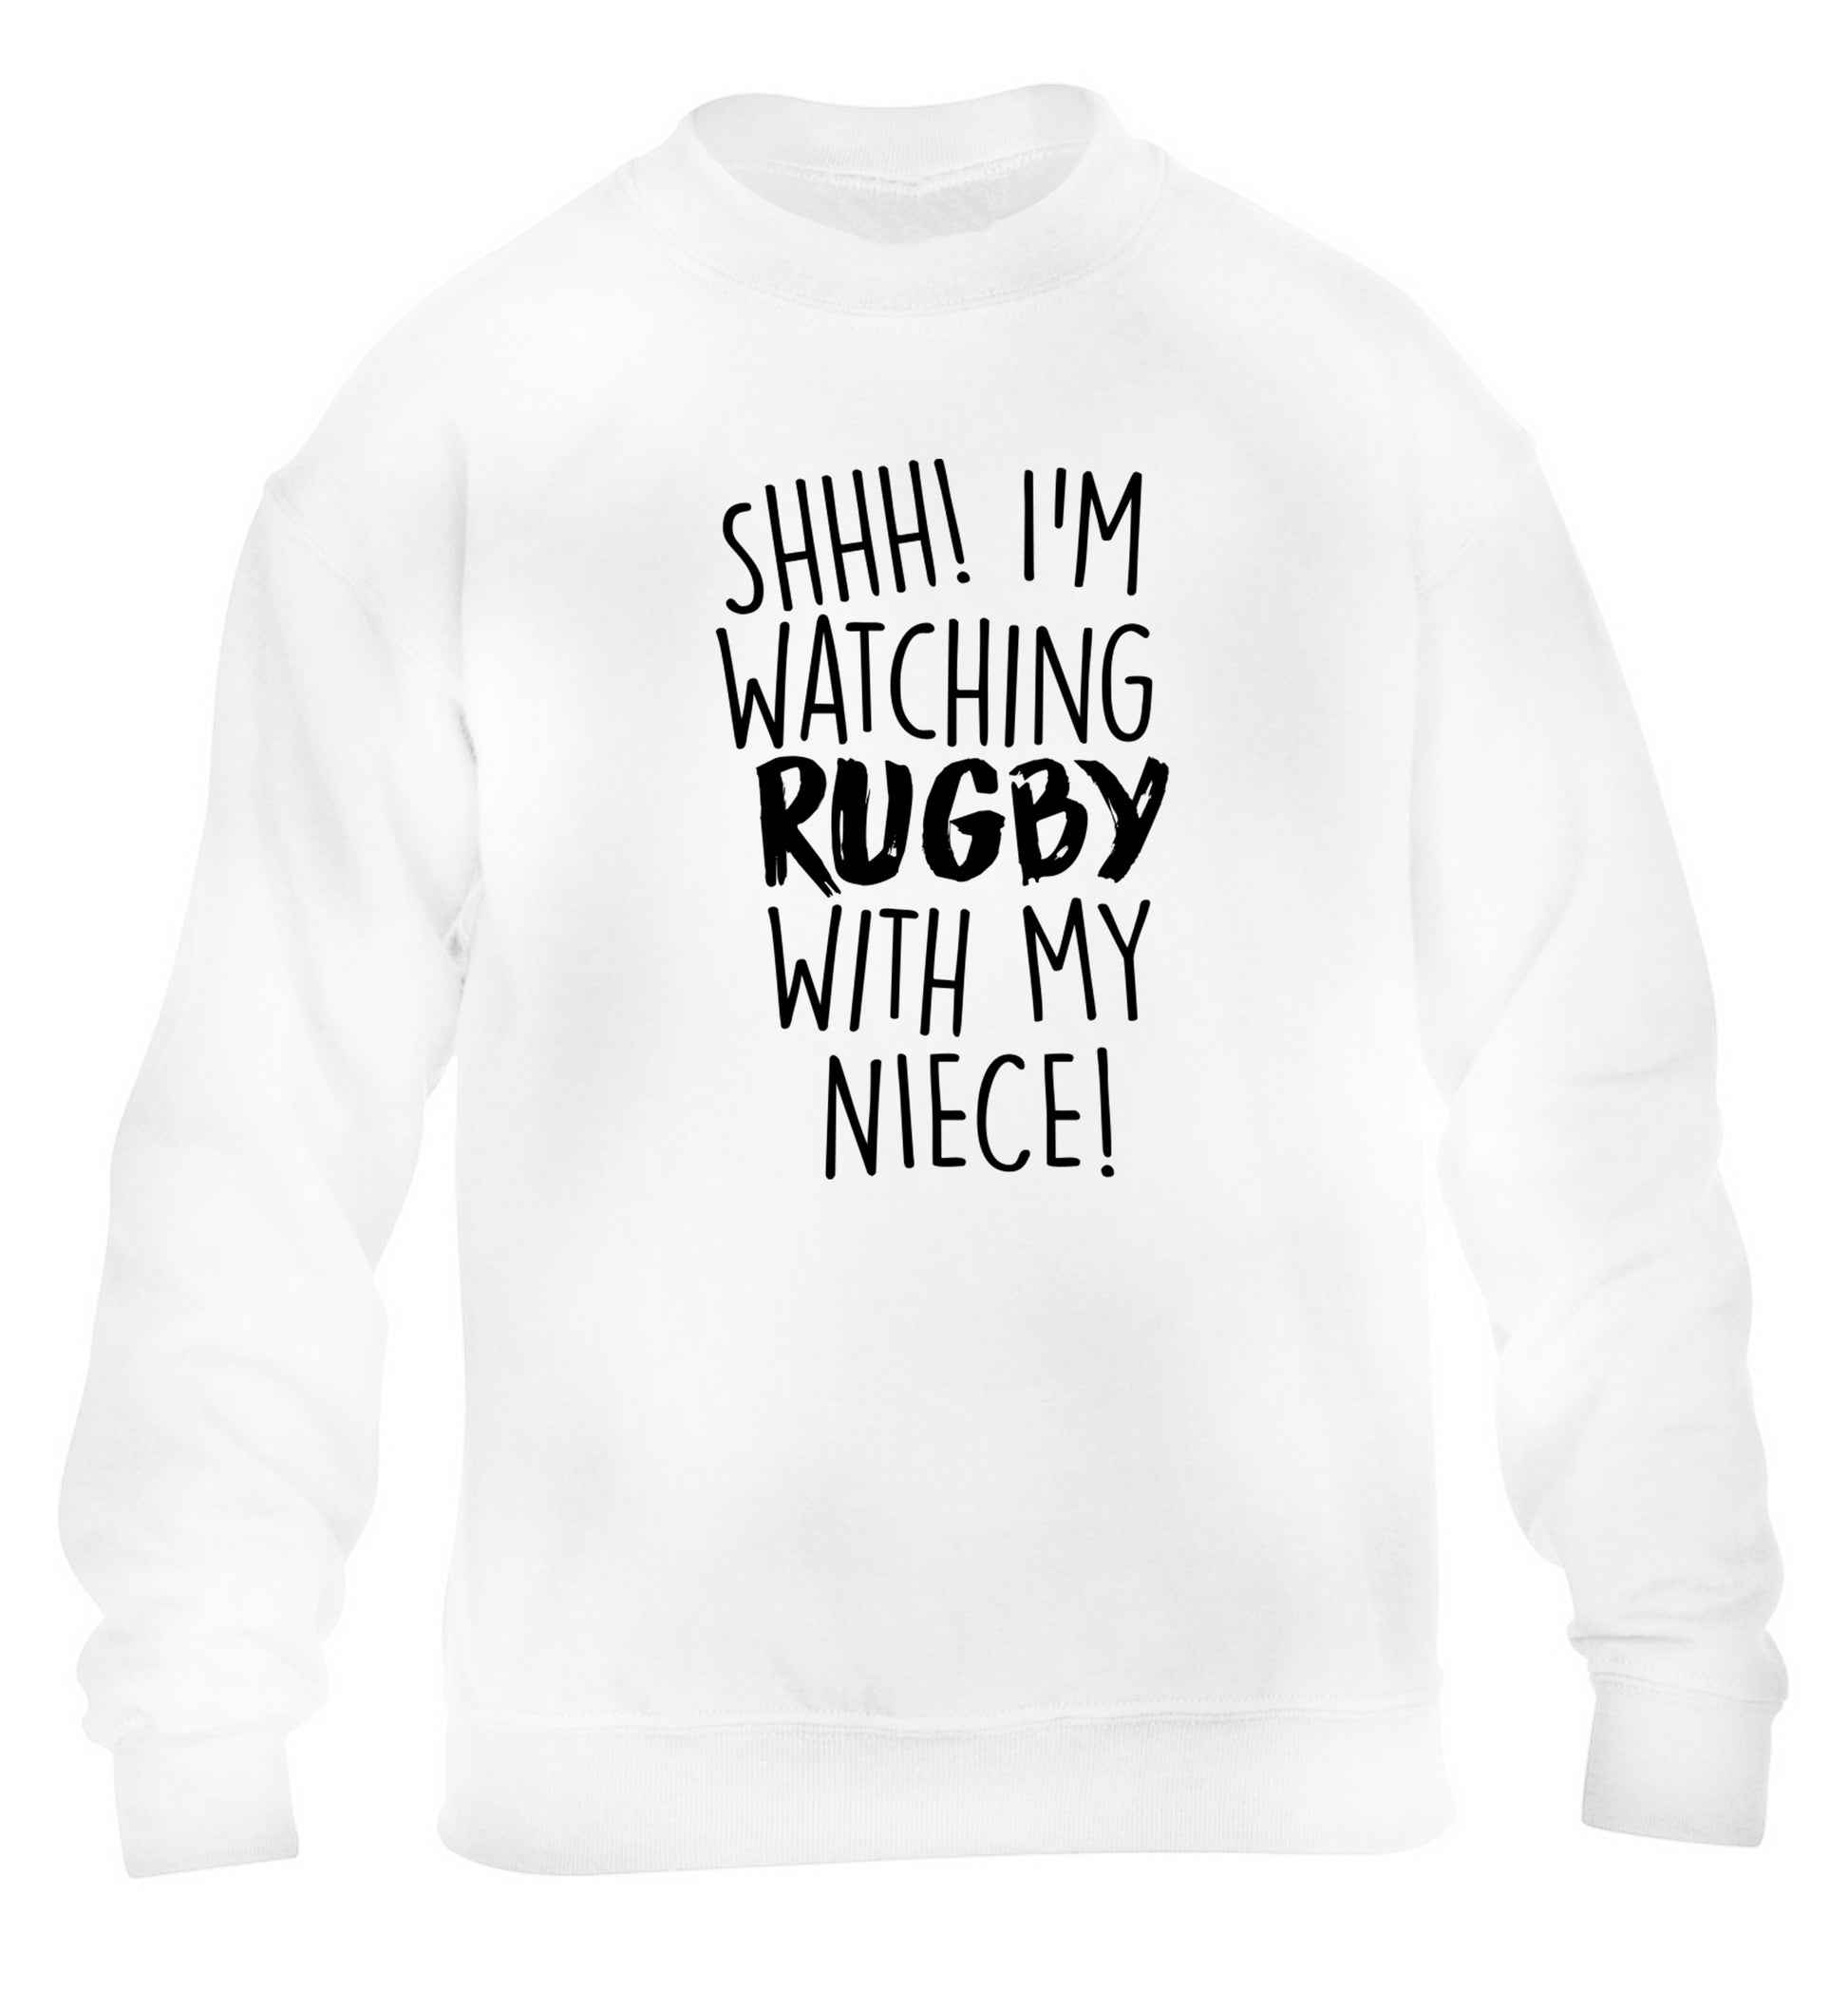 Shh.. I'm watching rugby with my niece children's white sweater 12-13 Years